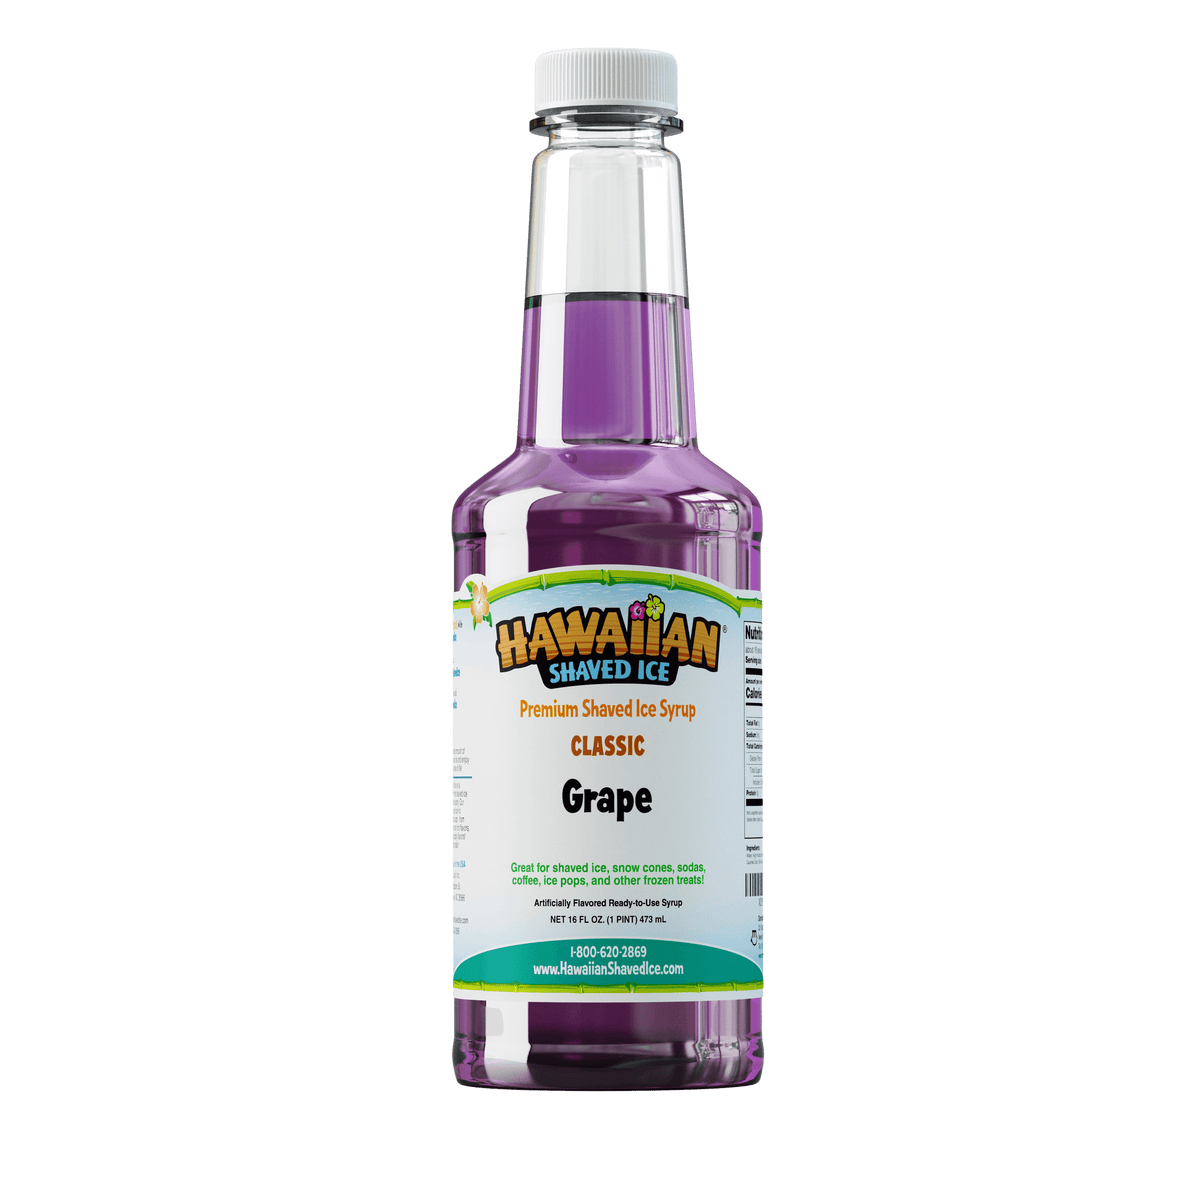 Purple, Pint bottle of Grape flavored syrup